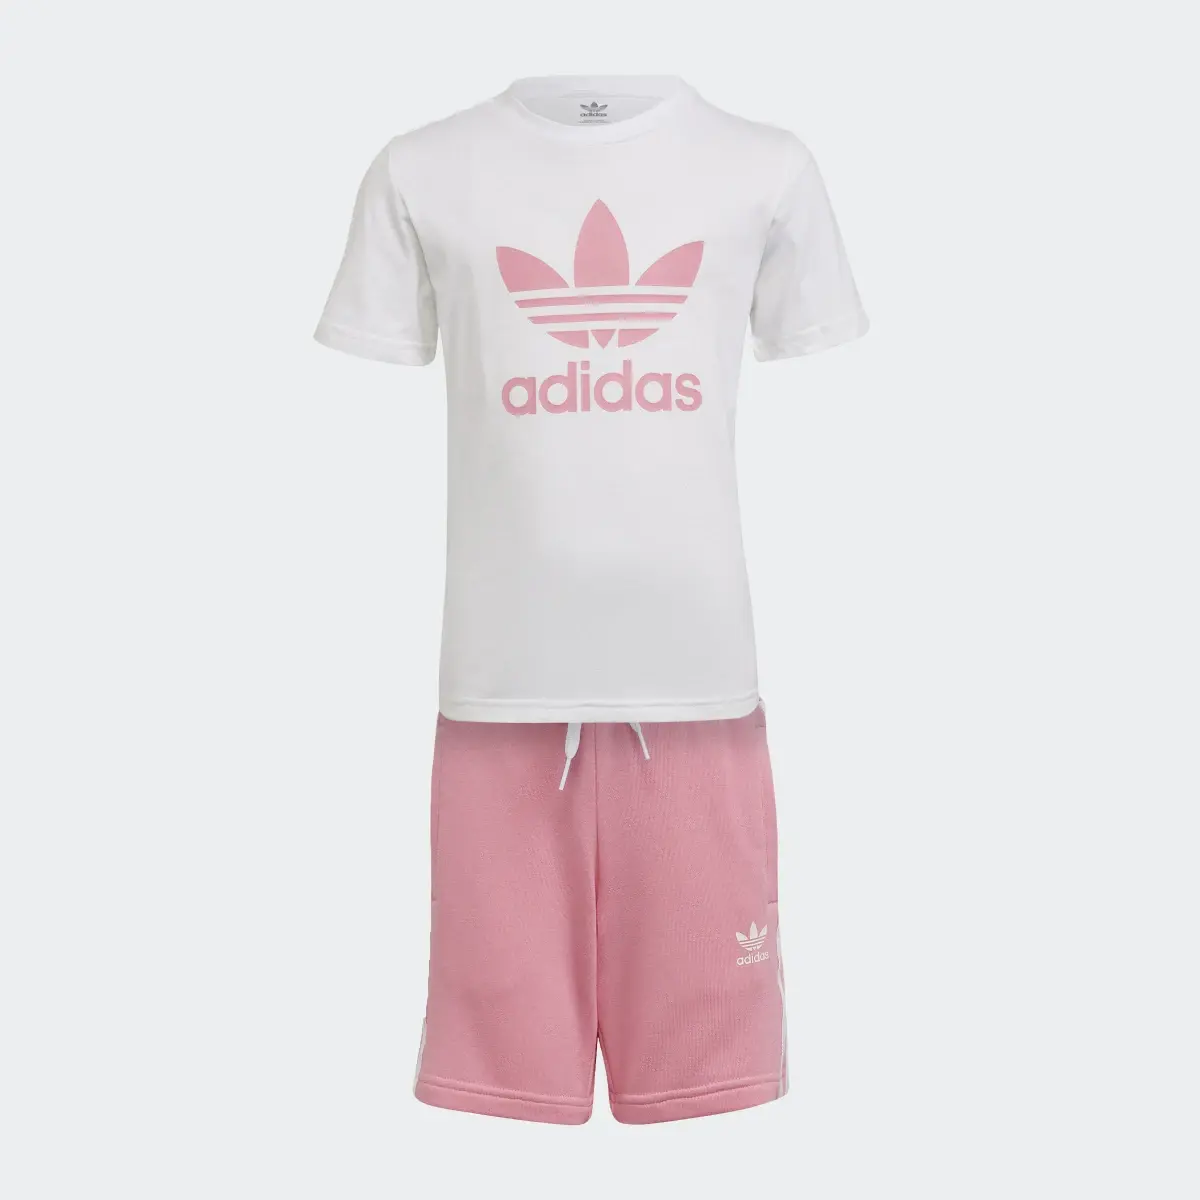 Adidas Completo adicolor Shorts and Tee. 1